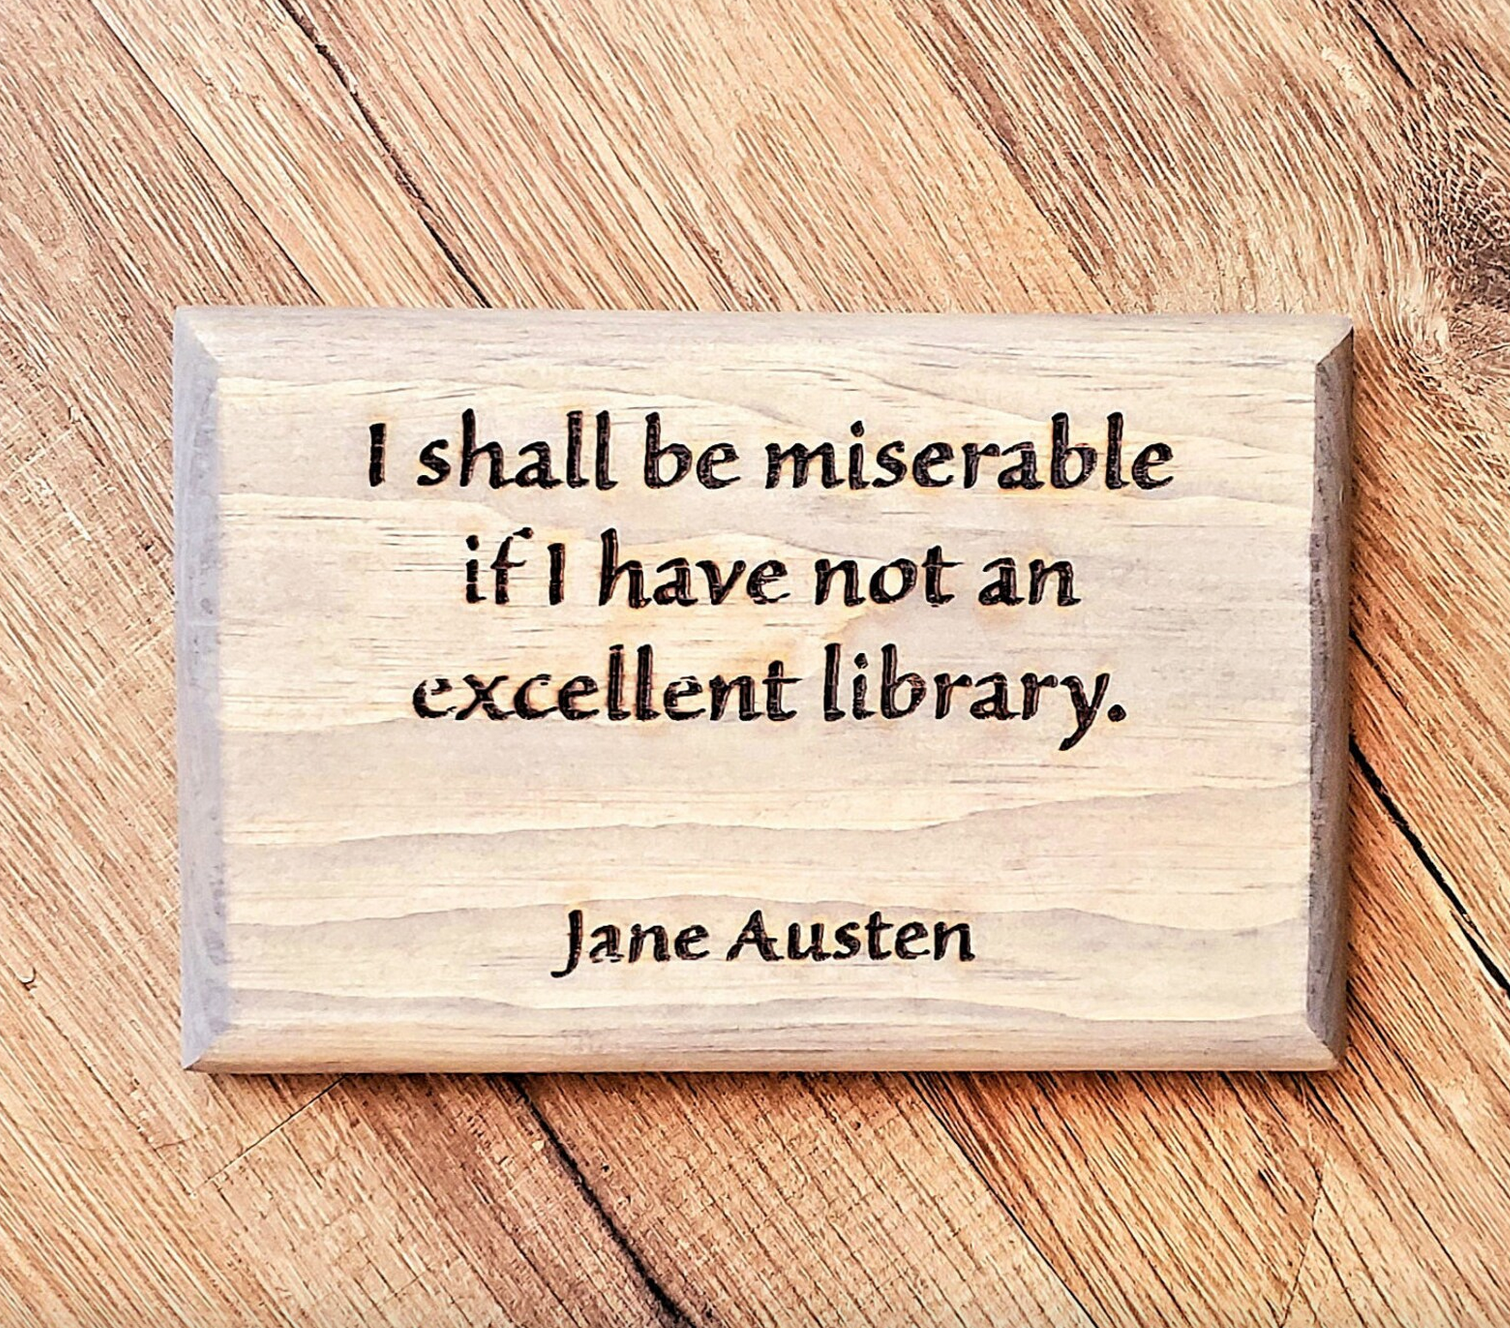 A wooden sign with the text "I shall be miserable if I have not an excellent library. Jane Austen"